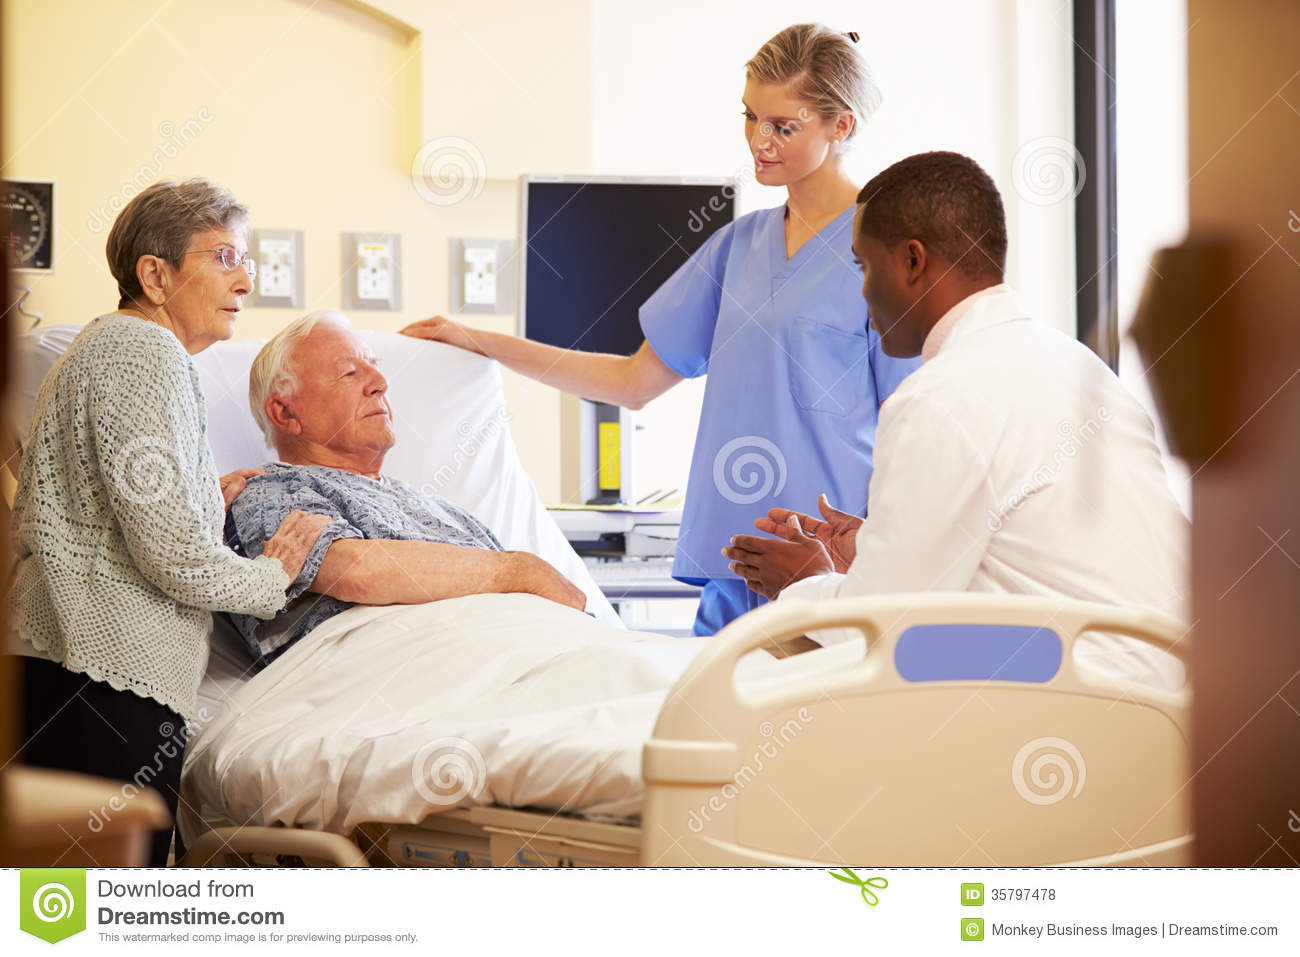 Stock Photos  Medical Team Meeting With Senior Couple In Hospital Room